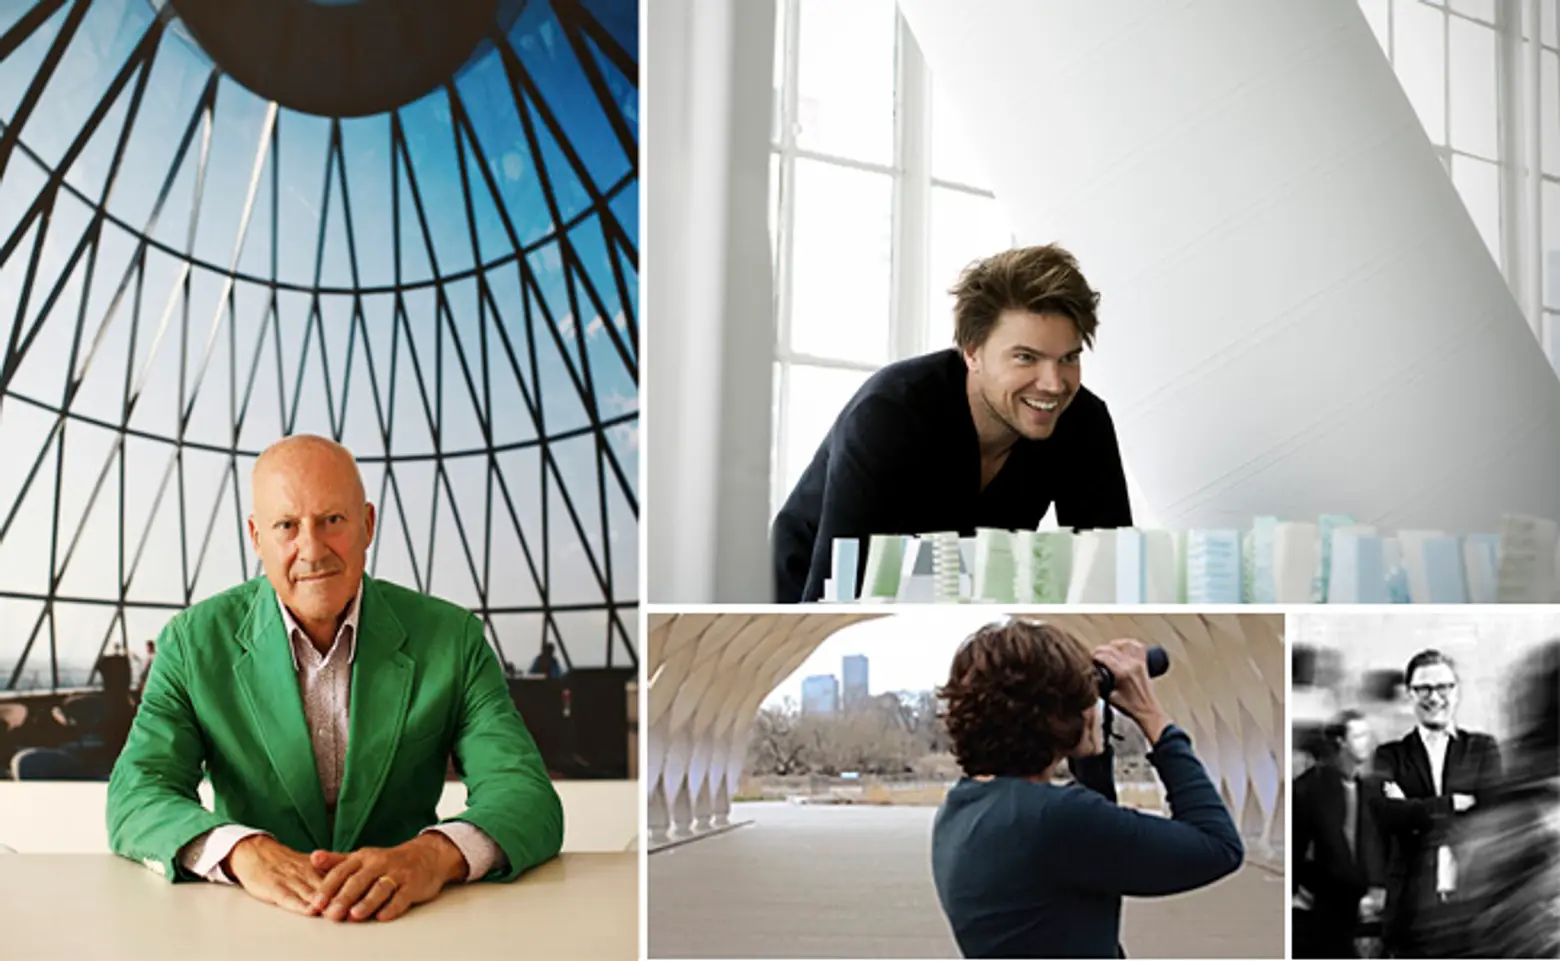 Place a Bid to Ride in Norman Foster’s Helicopter or Smoke Up with Bjarke Ingels in Copenhagen